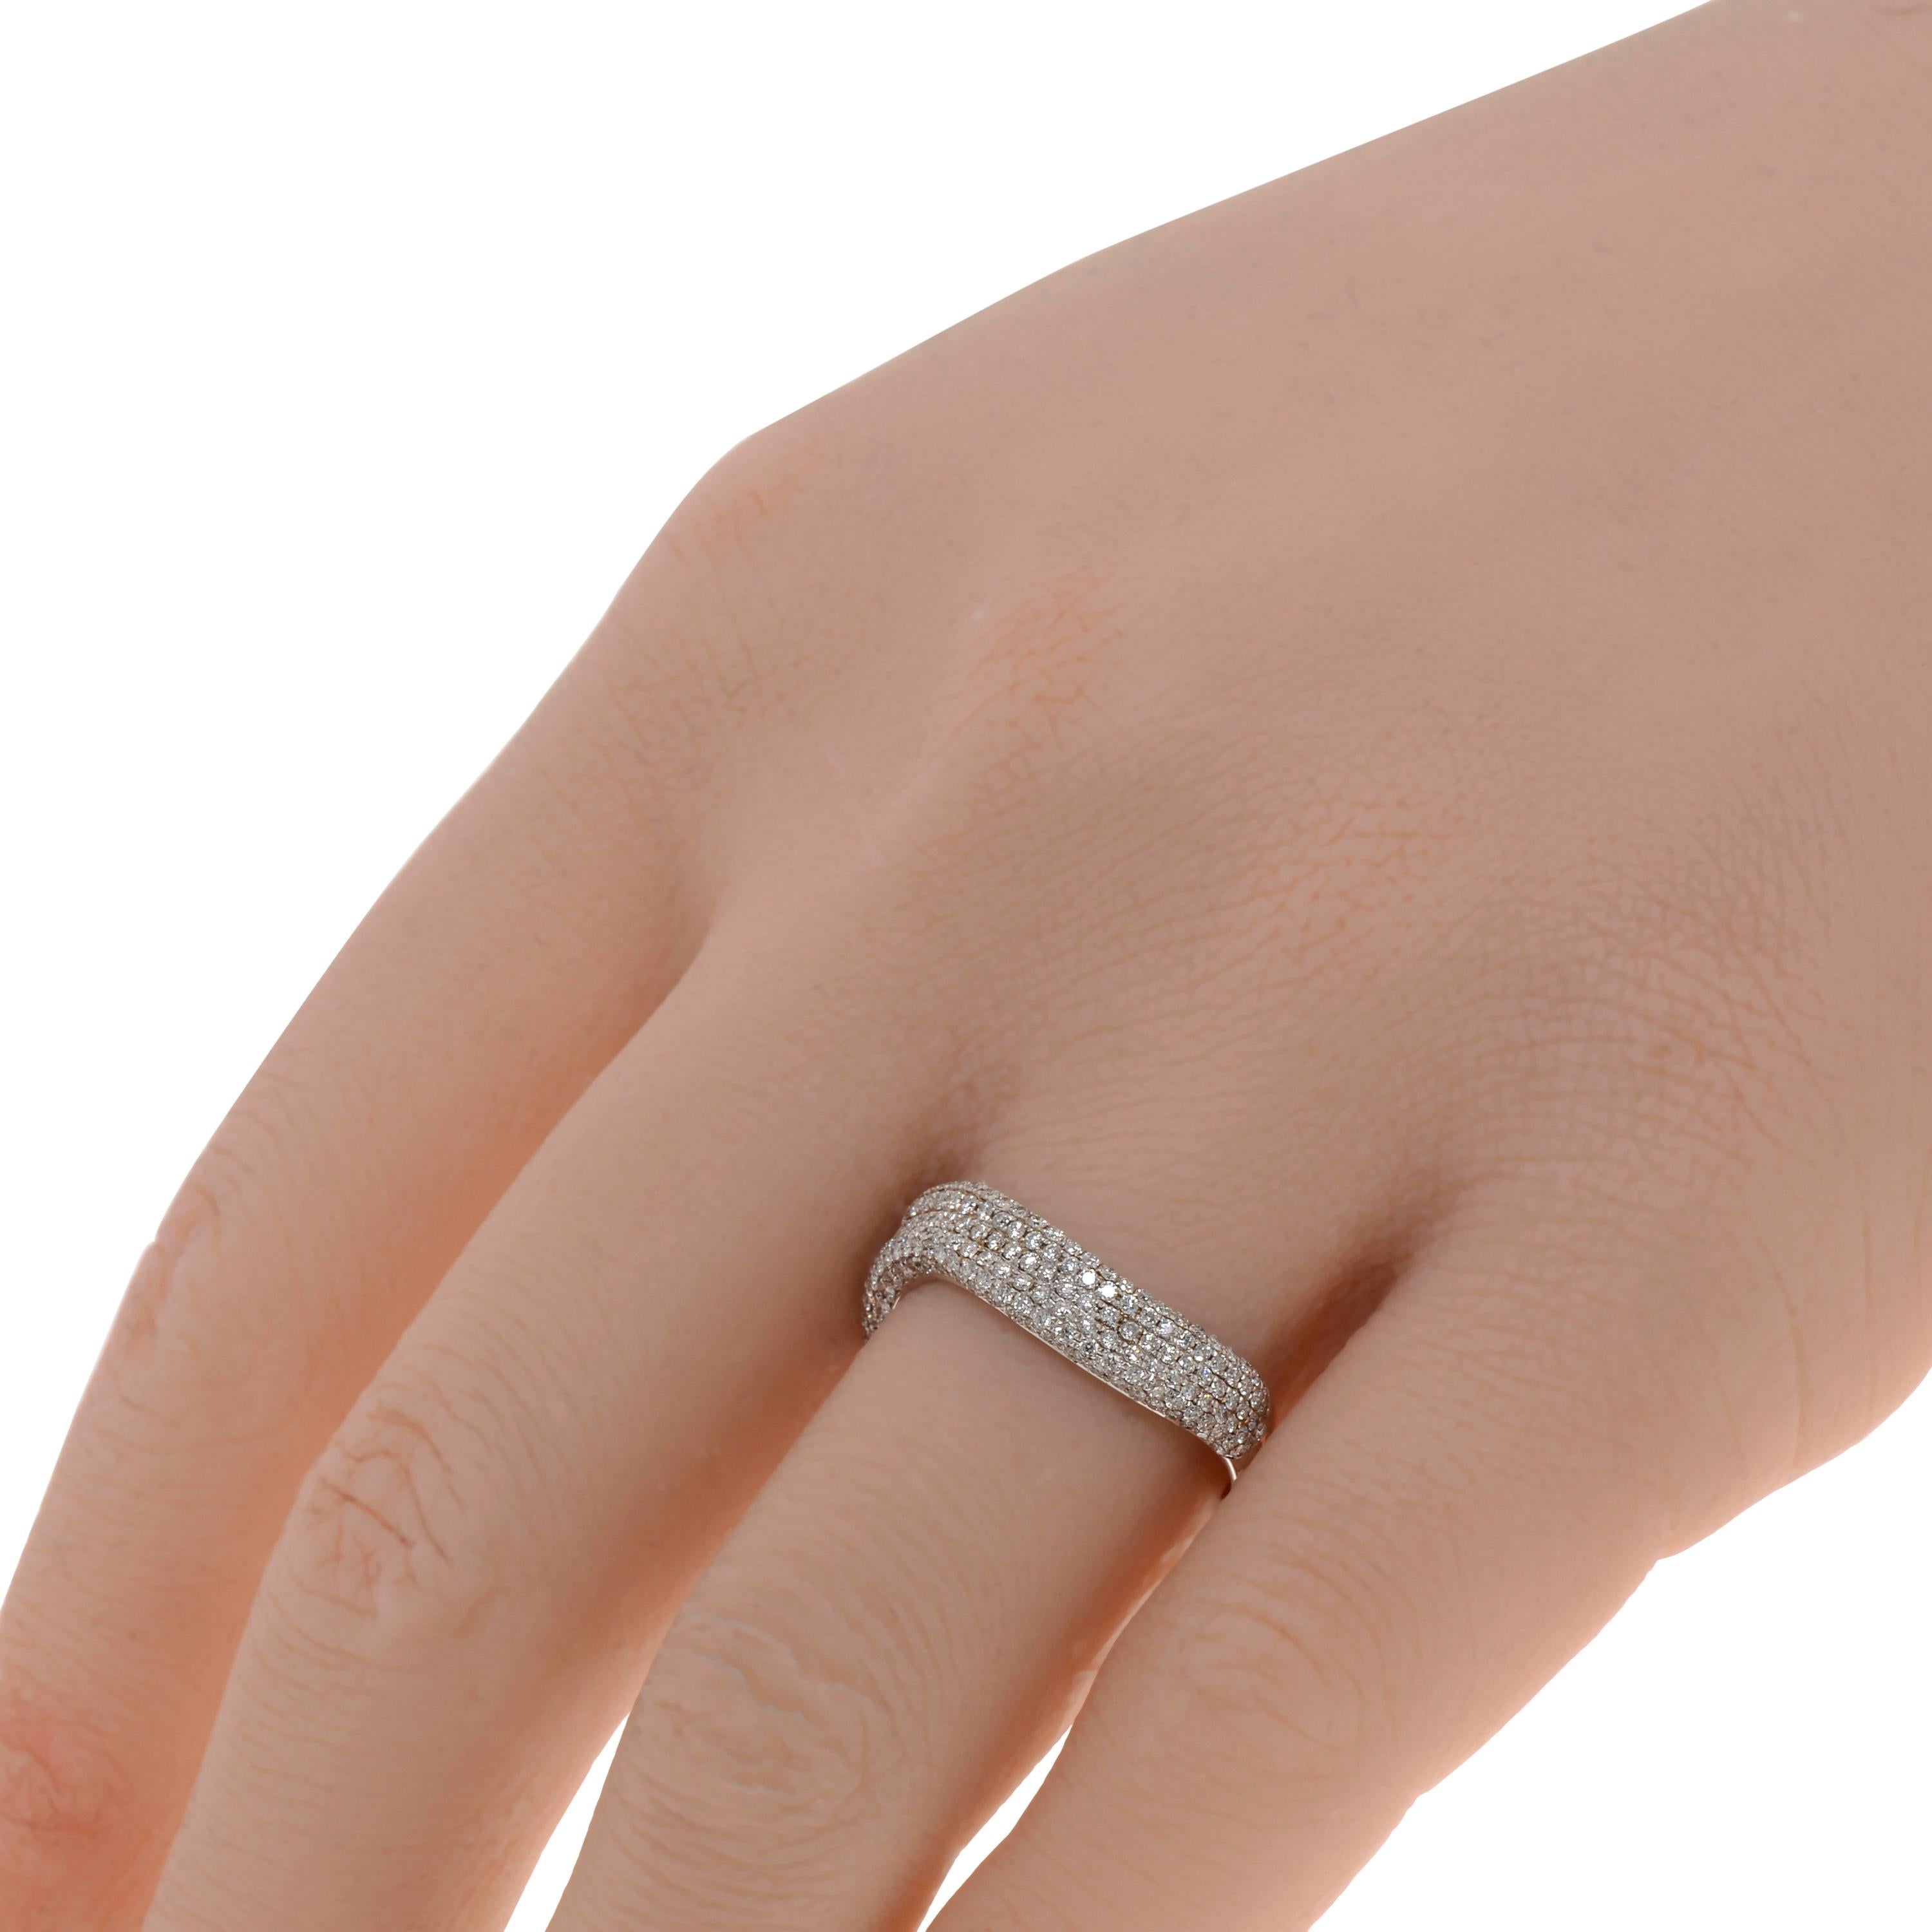 This contemporary Piero Milano 18K White Gold Curved Ring features layers of striking diamonds 0.65ct. tw. lining a curved white gold band. The ring size is 7.5 (55.7). The Band Width is 4.6mm. The Weight is 4.2g.
